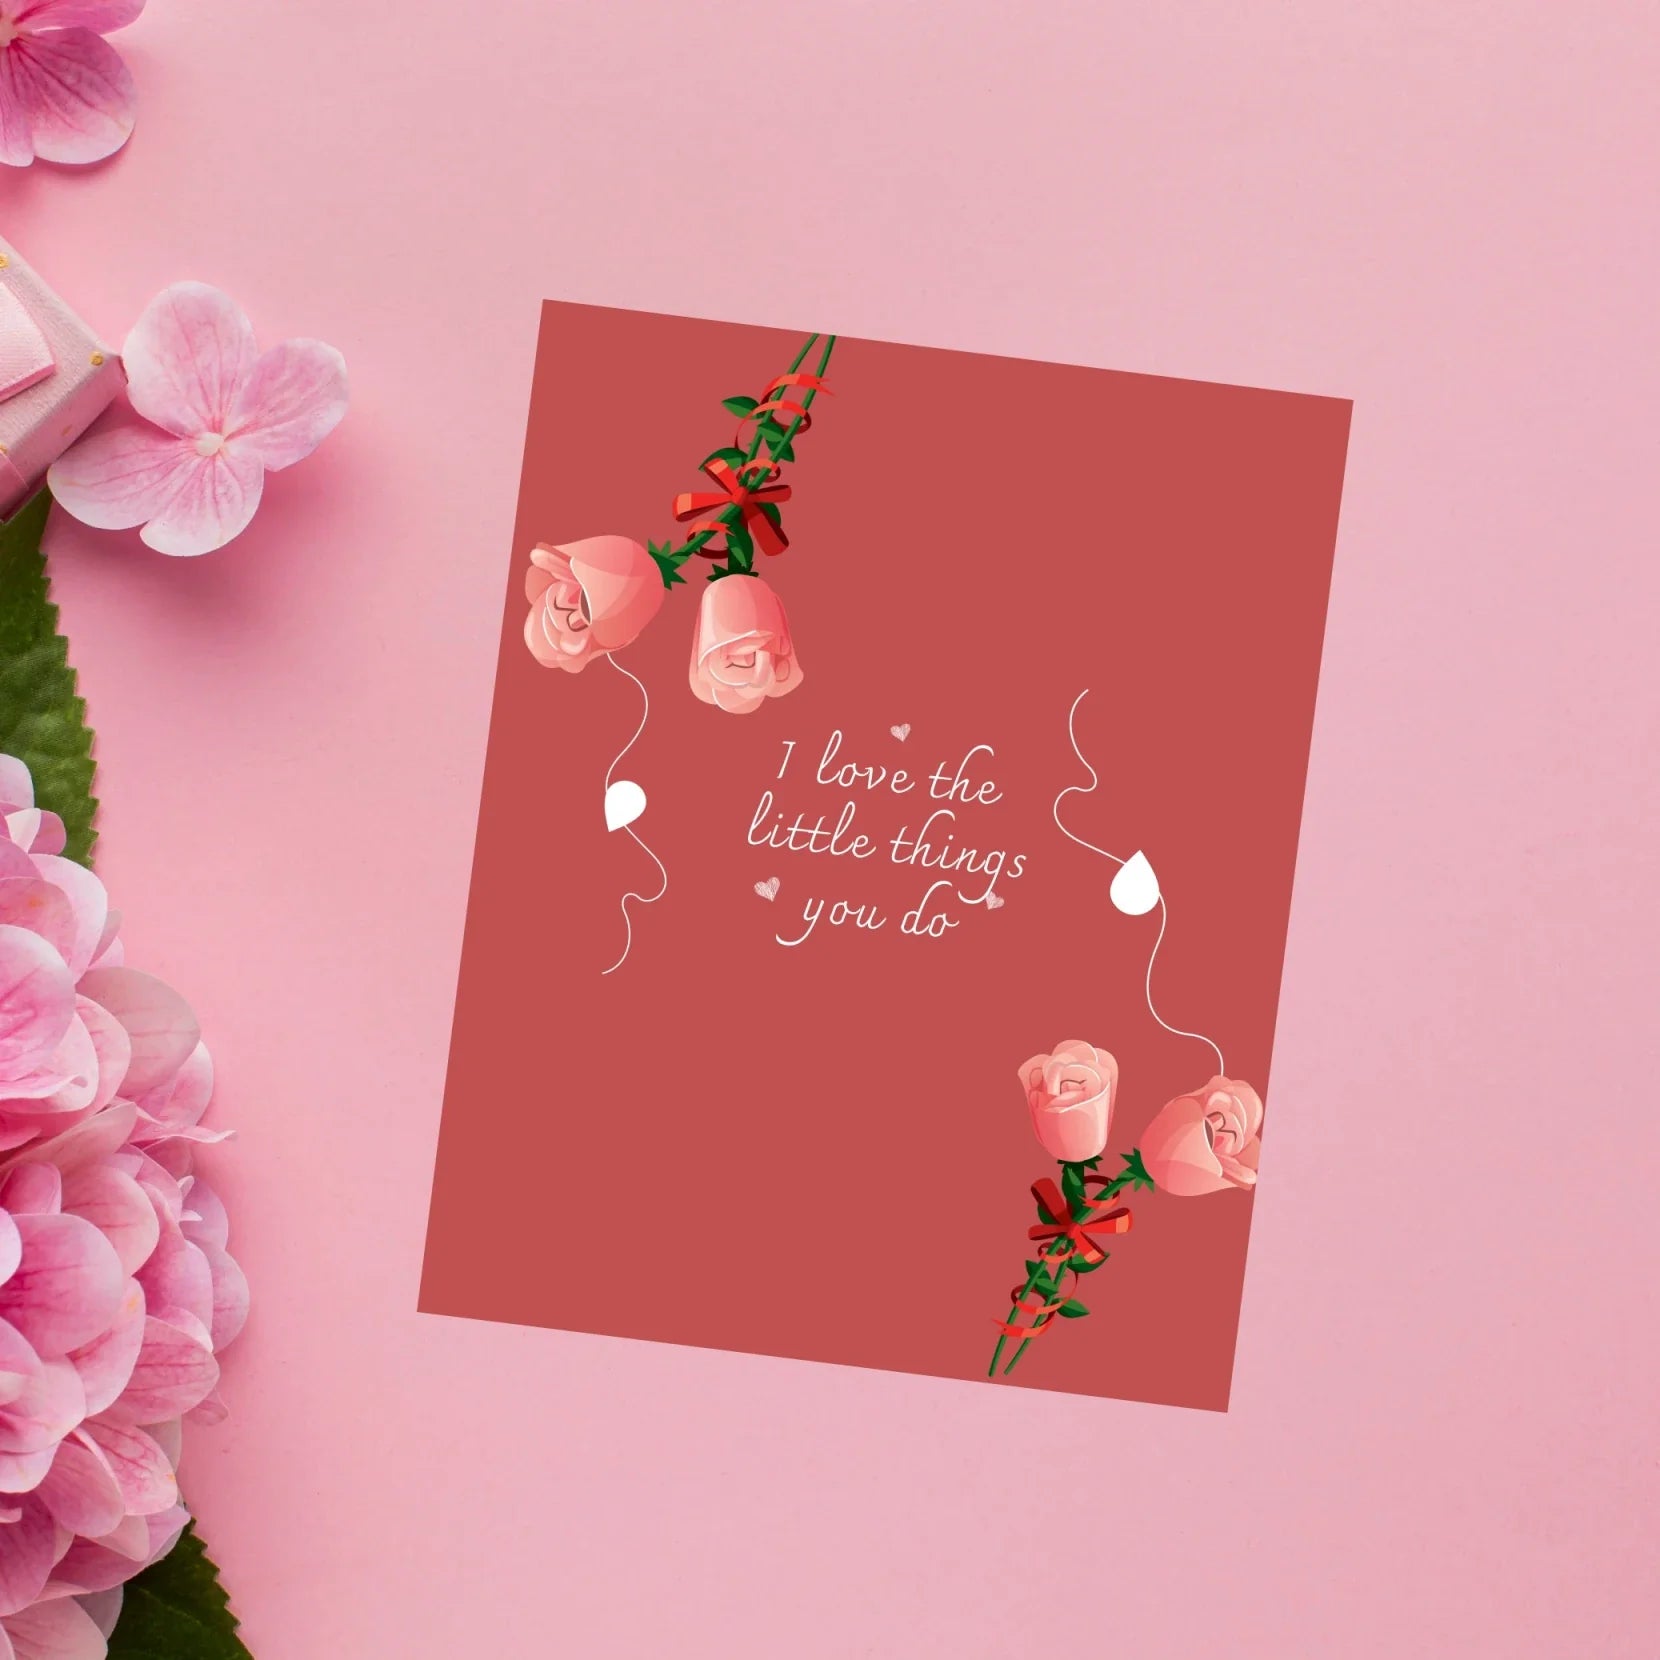 Add a romantic valentine postcard to send across some special note